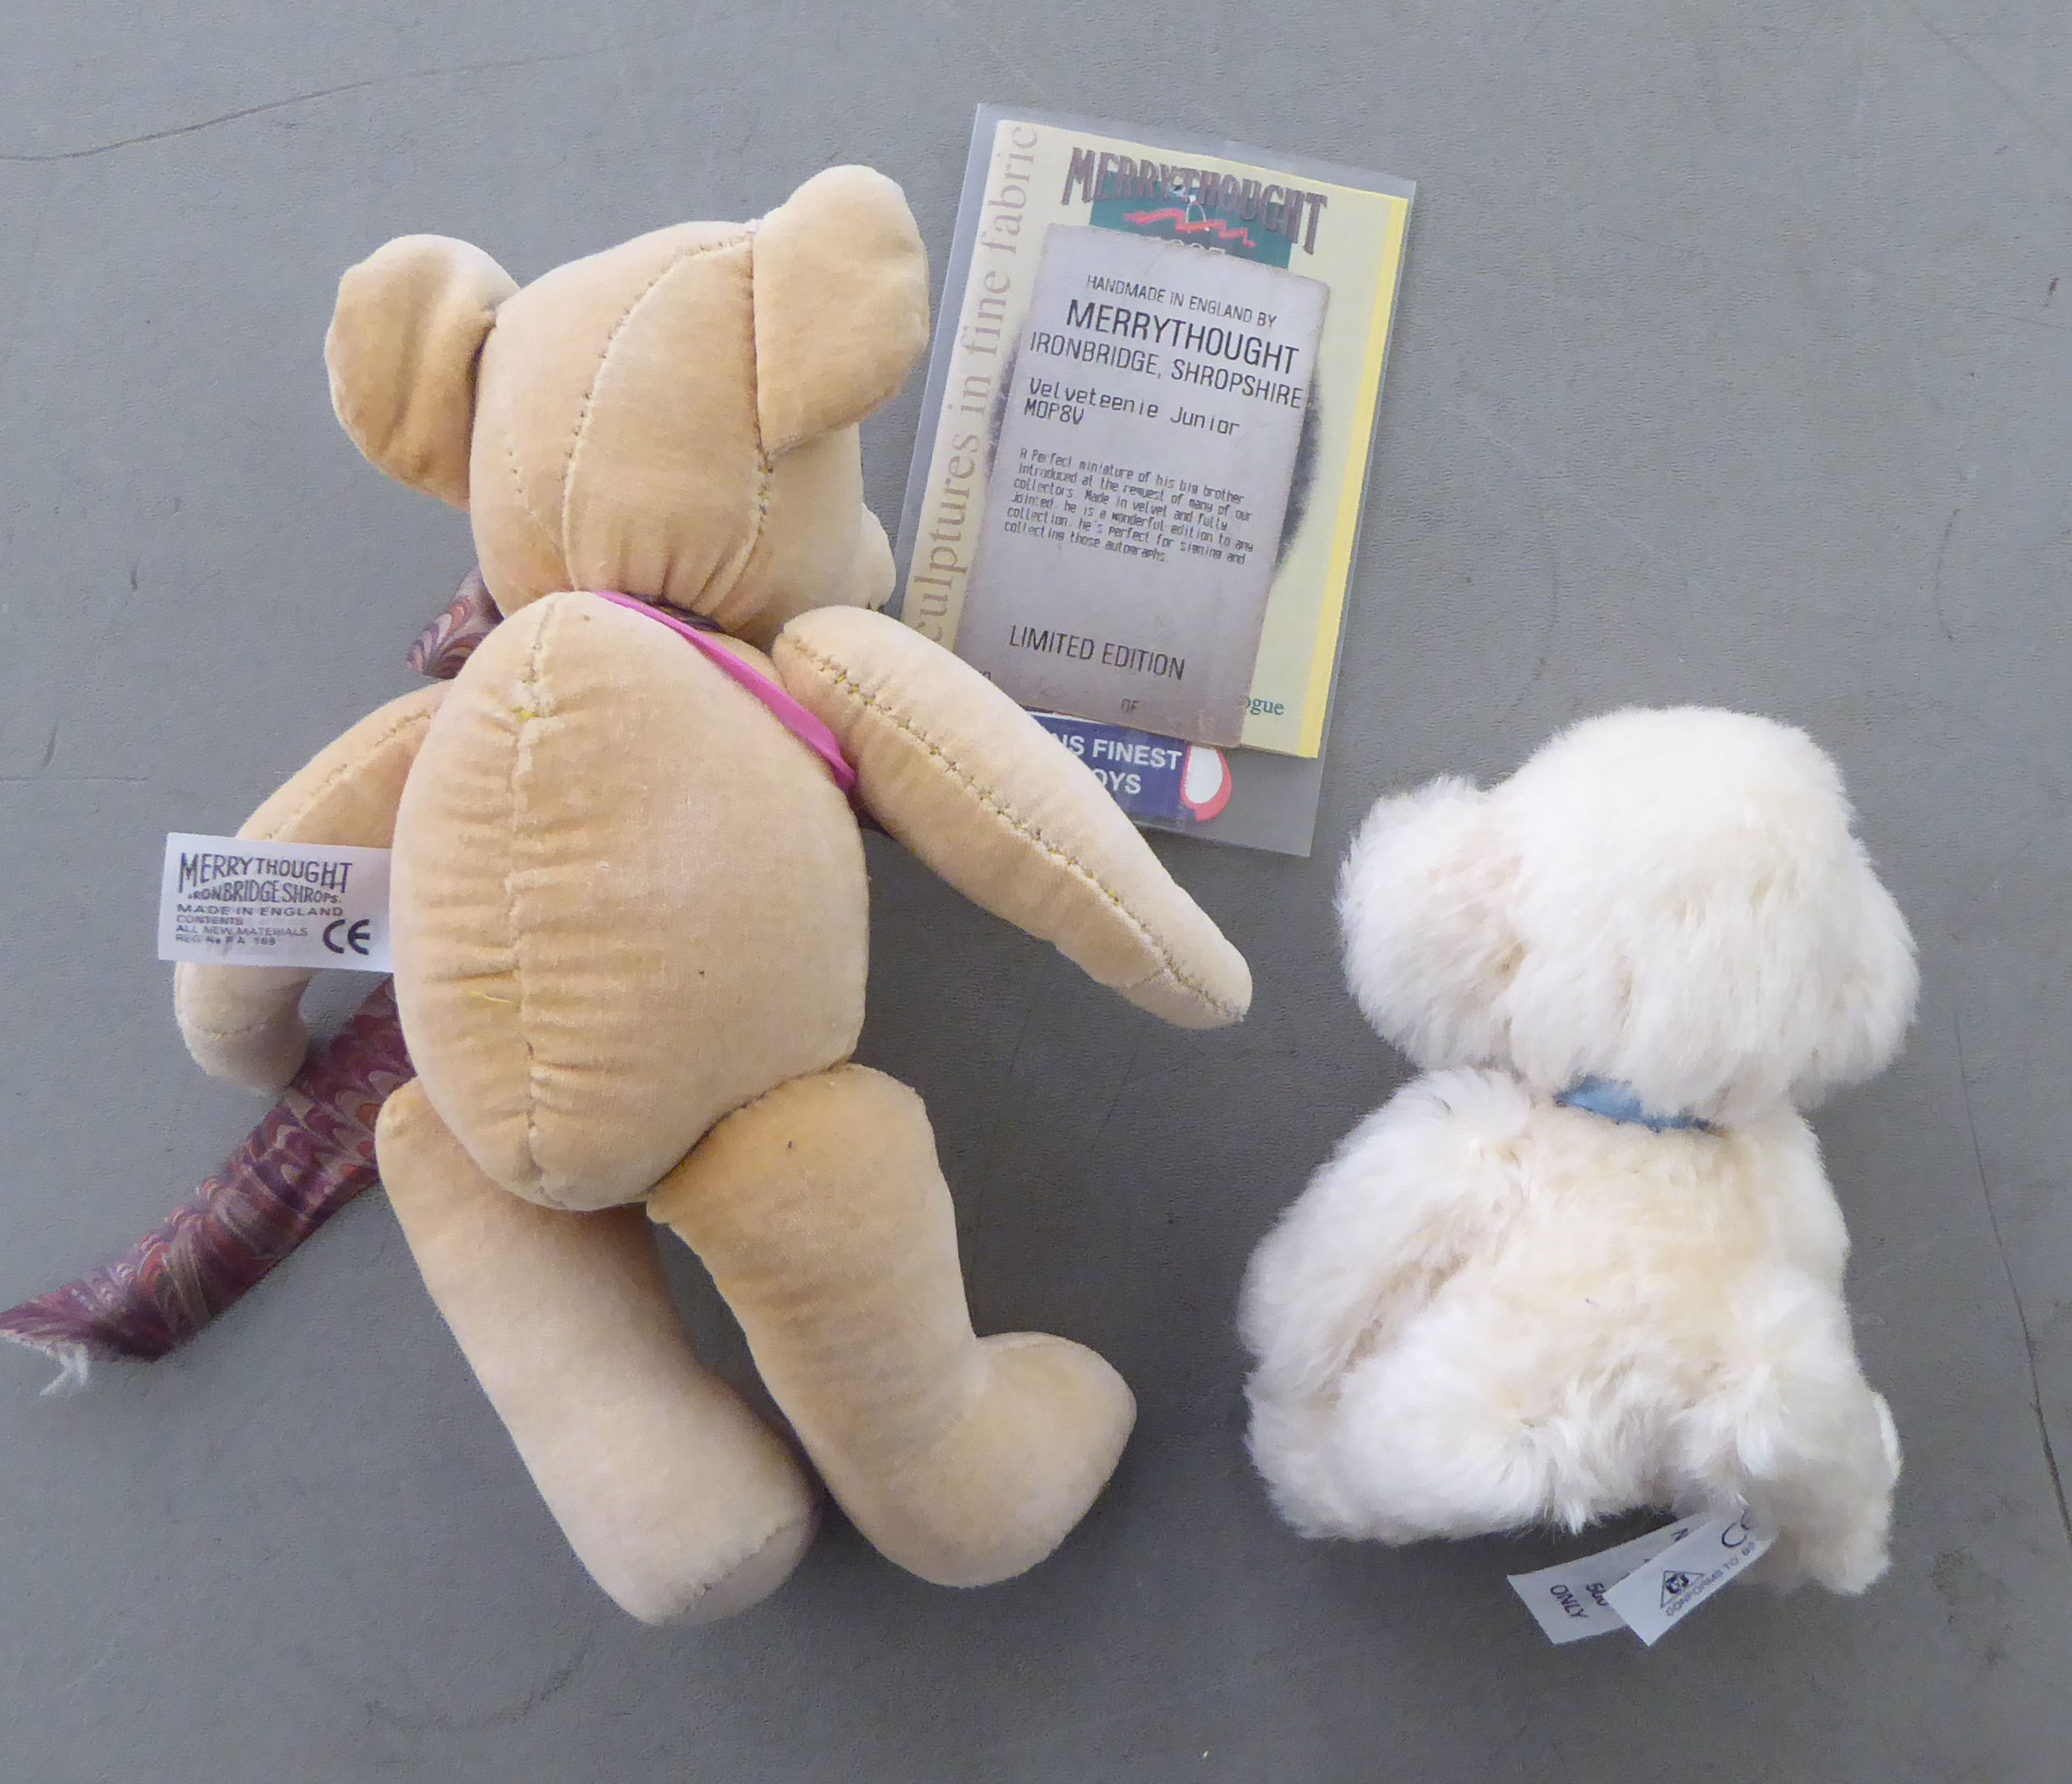 Two Merrythought Teddy bears, viz. 'Velveteenie Junior'  Limited Edition 106/500  8"h; and a - Image 2 of 6